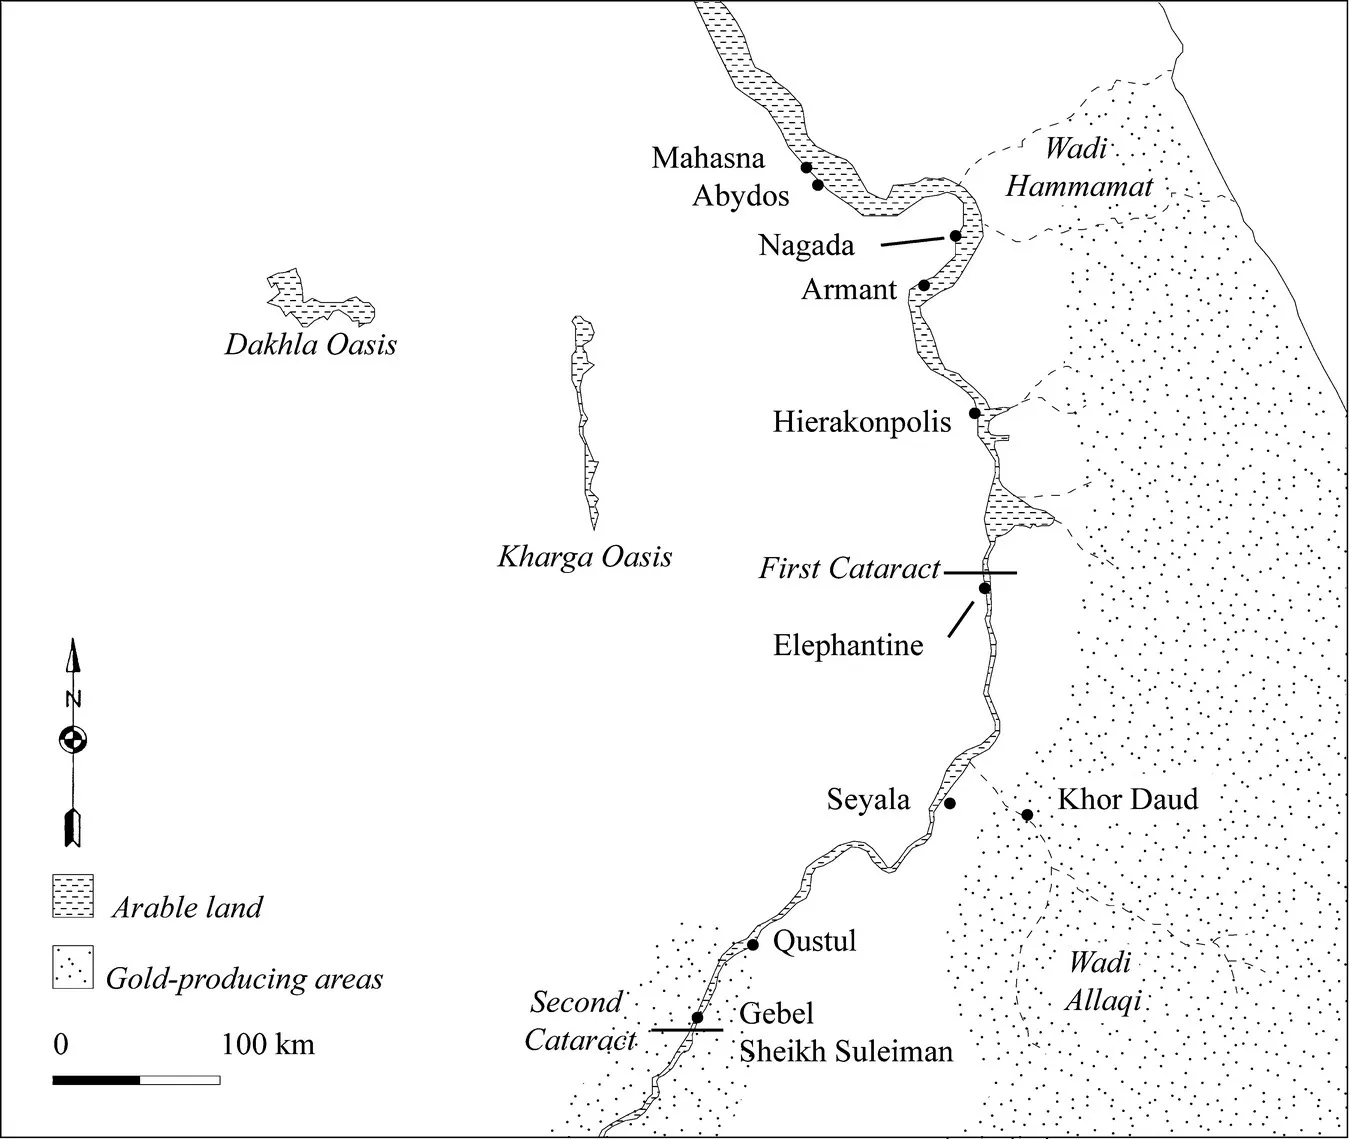 Map displaying the sites of southern Egypt and Nubia such as Seyala, Elephantine, Dakhla oasis, Kharga oasis, Hierakonpolis, and Wadi Allaqi. Shaded areas on the map represent arable land and gold-producing areas.